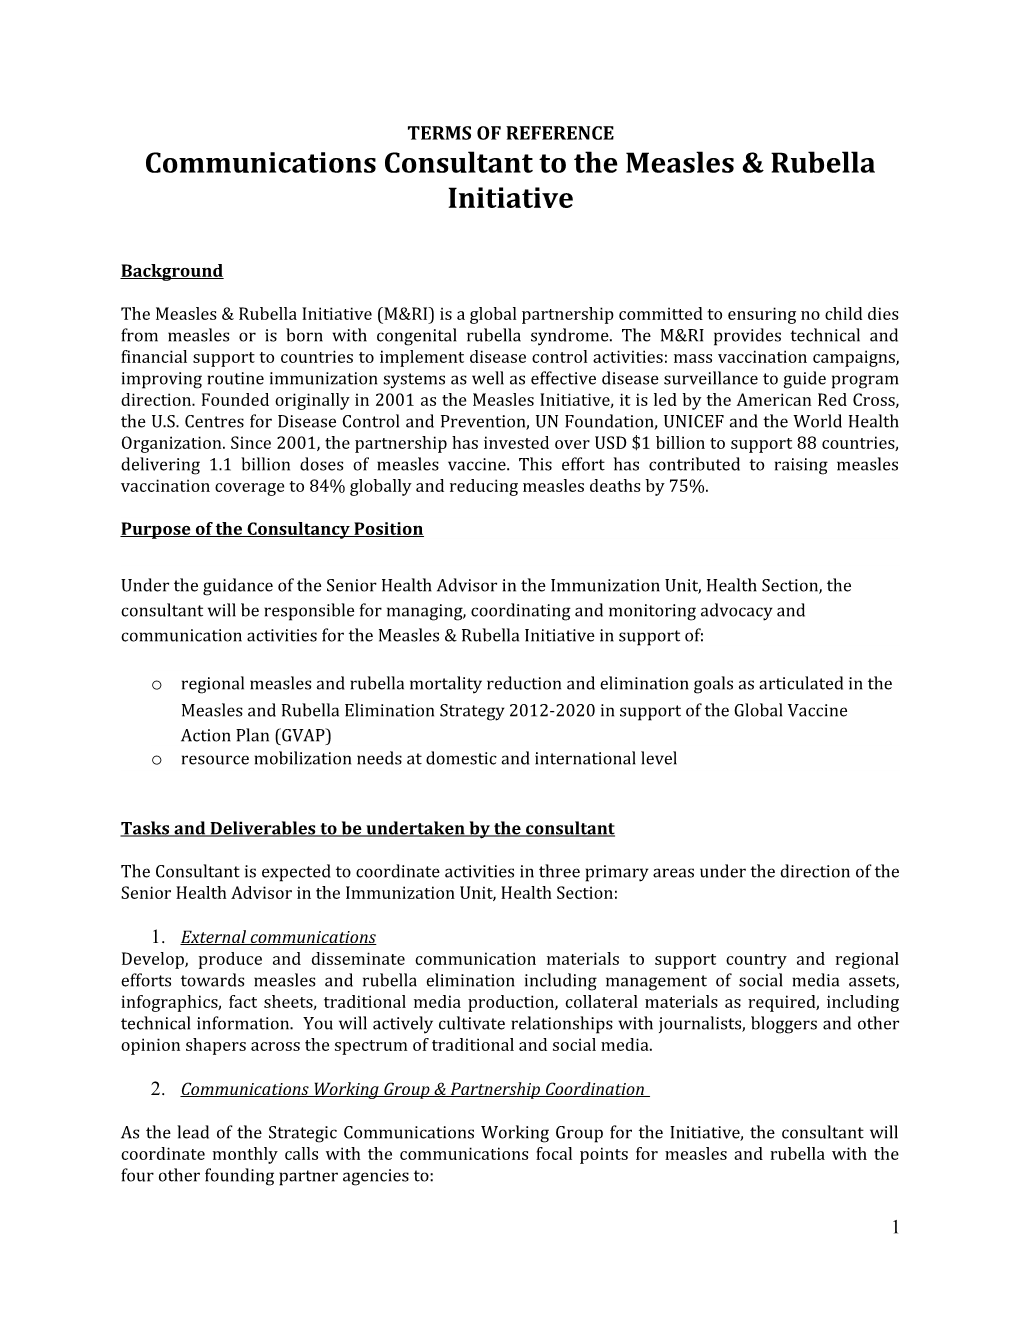 Communications Consultant to the Measles & Rubella Initiative